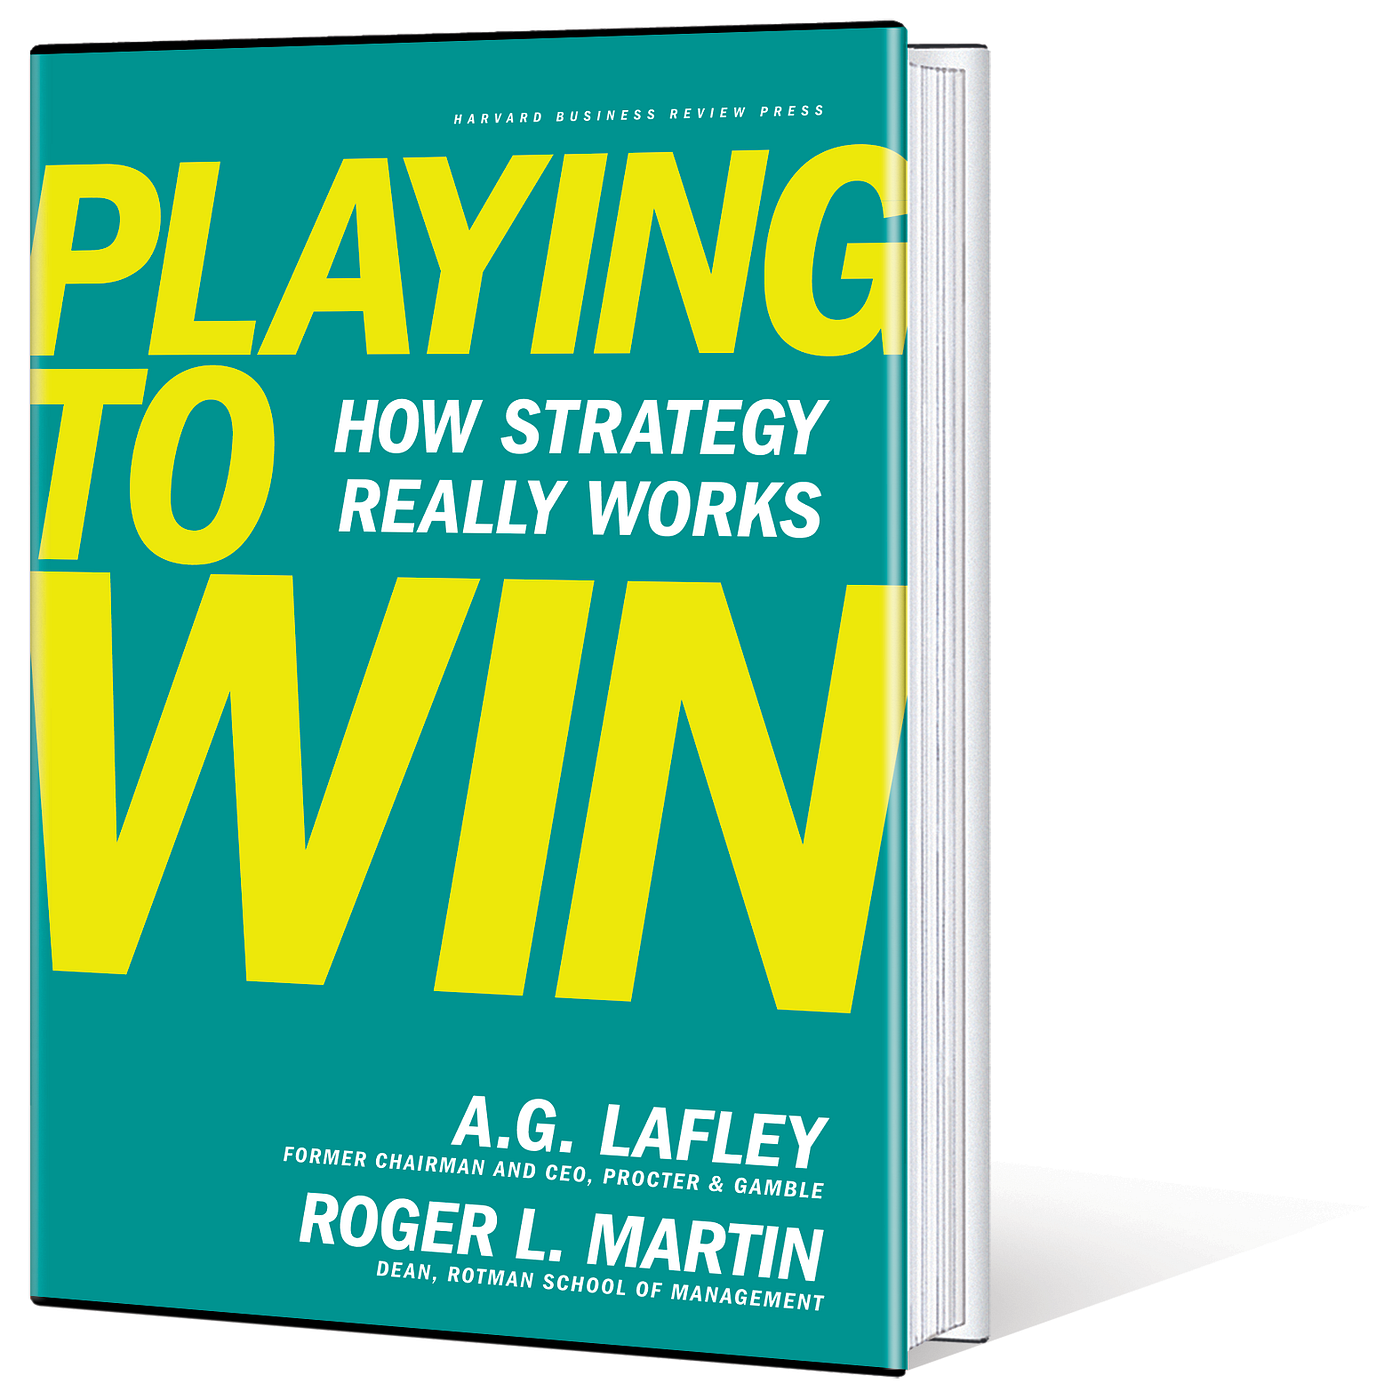 Playing to Win: How to Win More Often and Have More Fun Playing